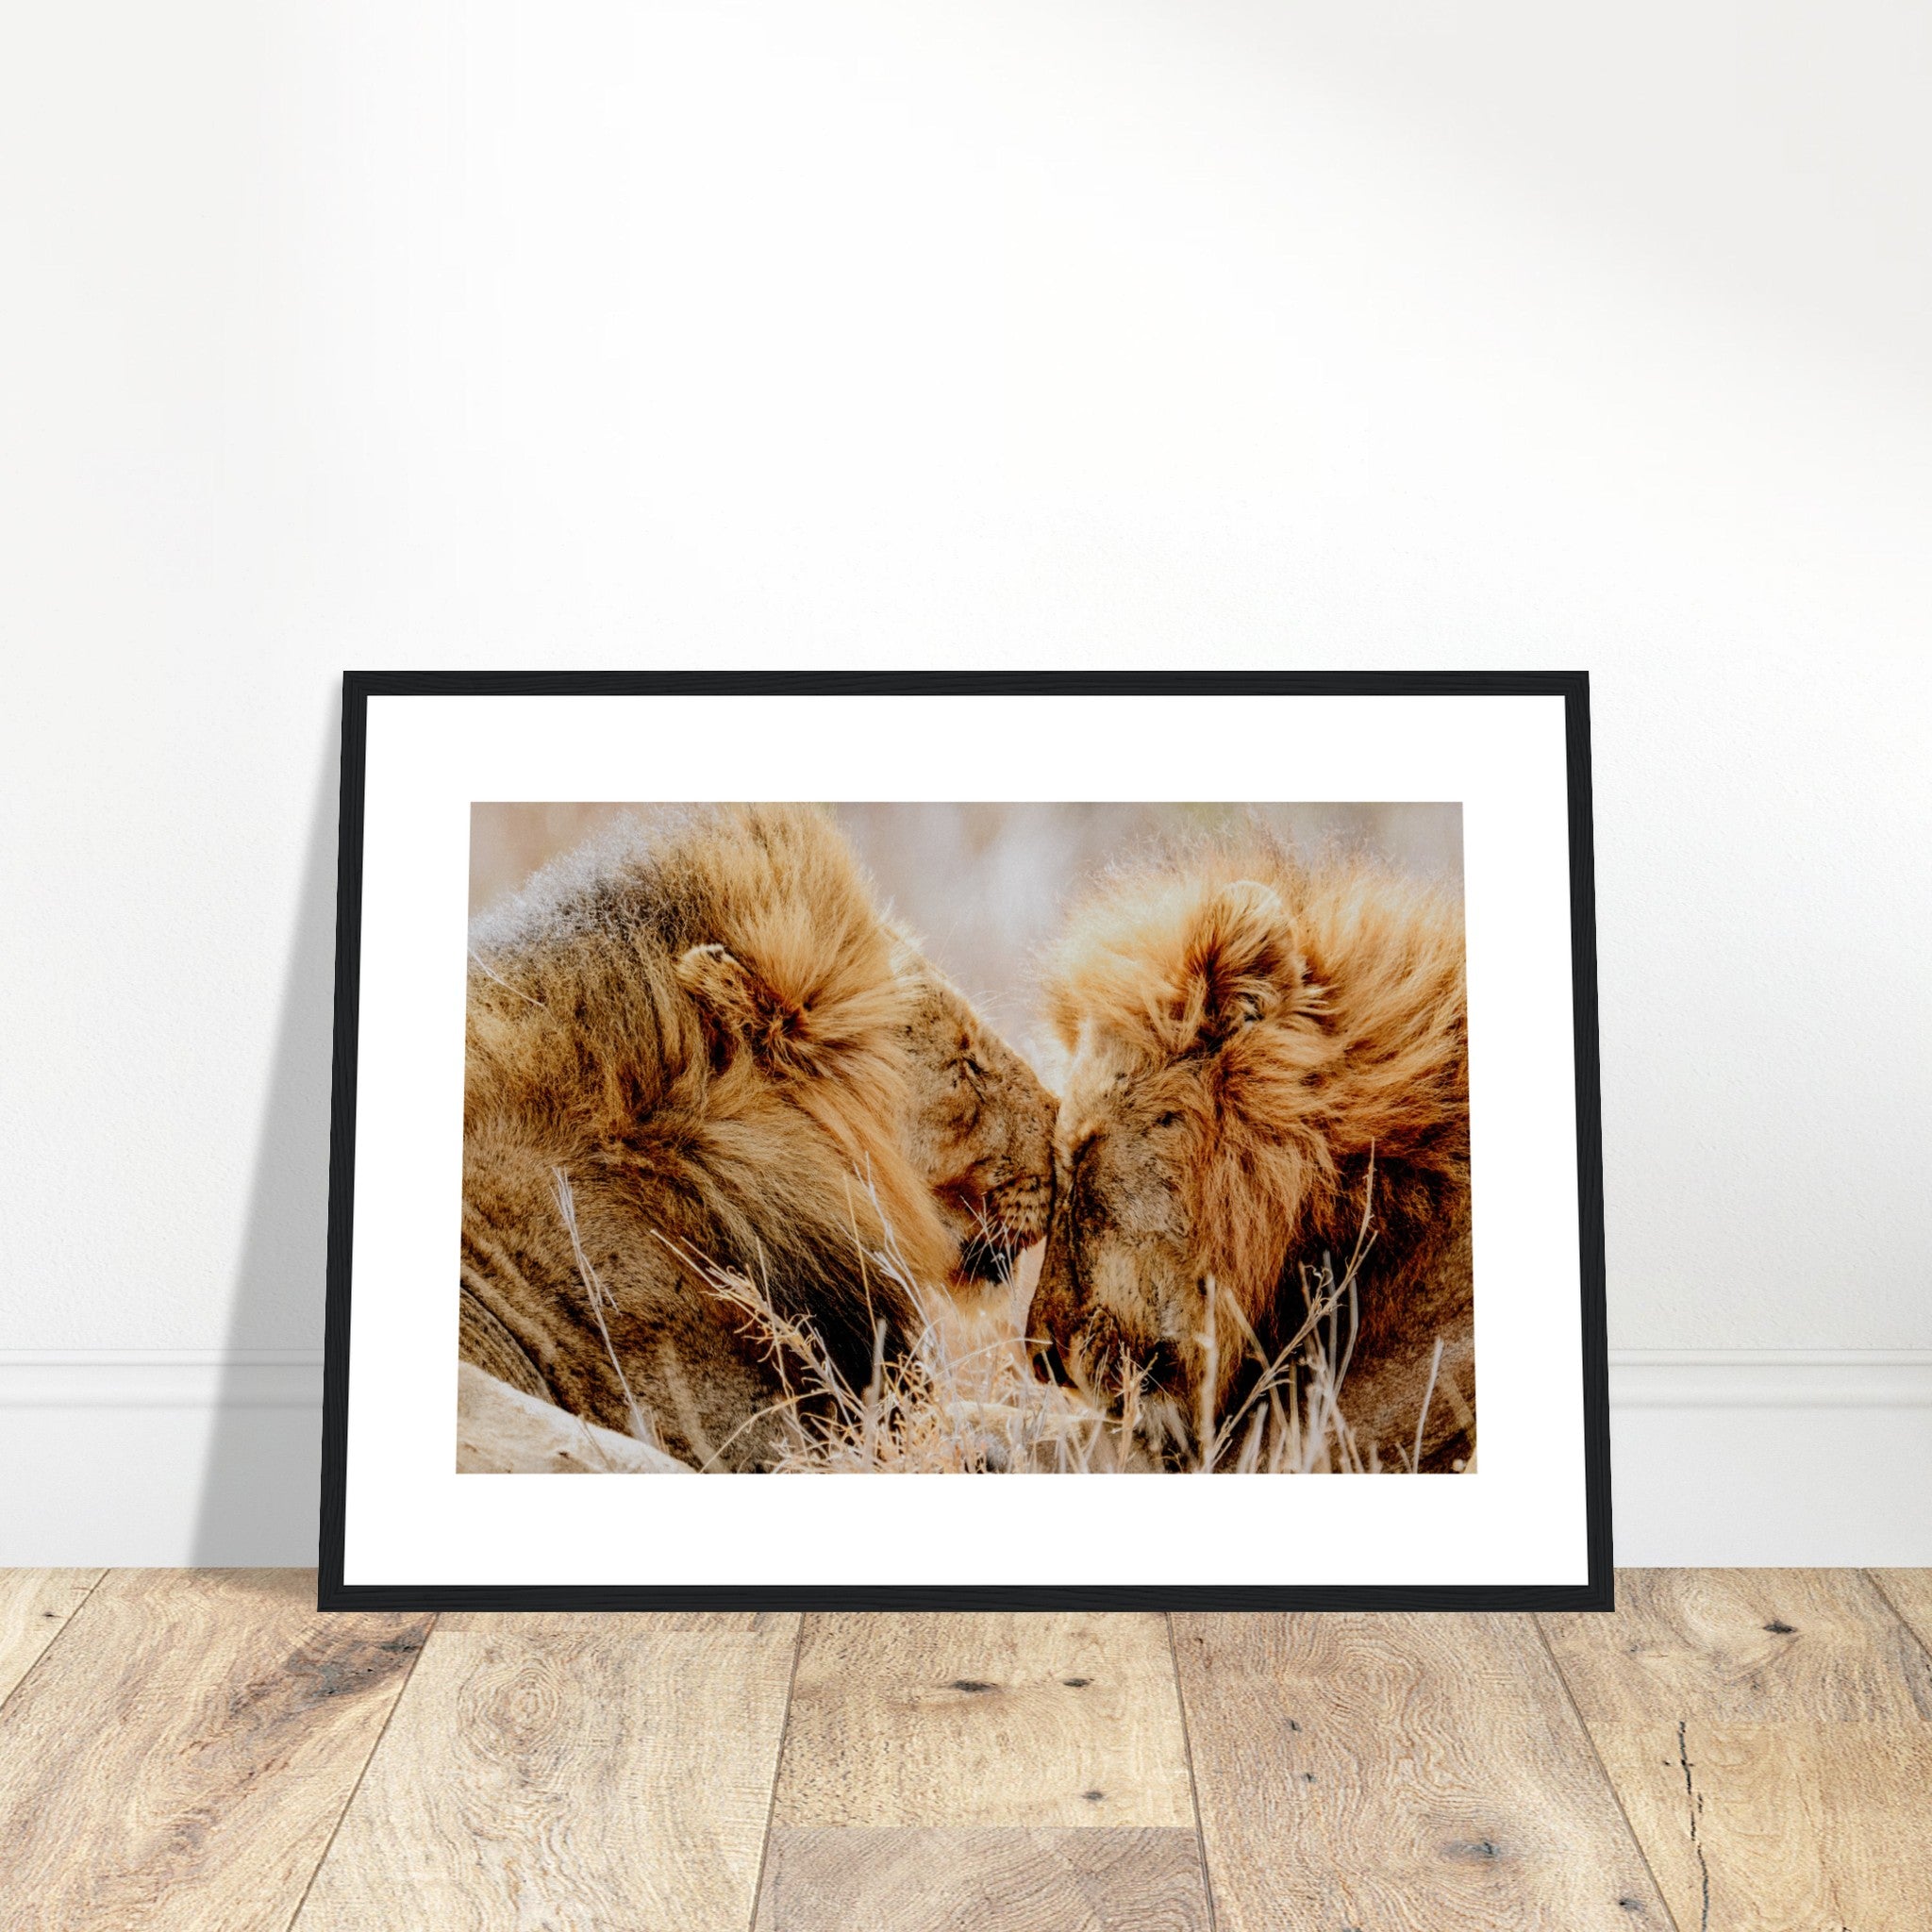 Cute Lions In Their Habitat Poster